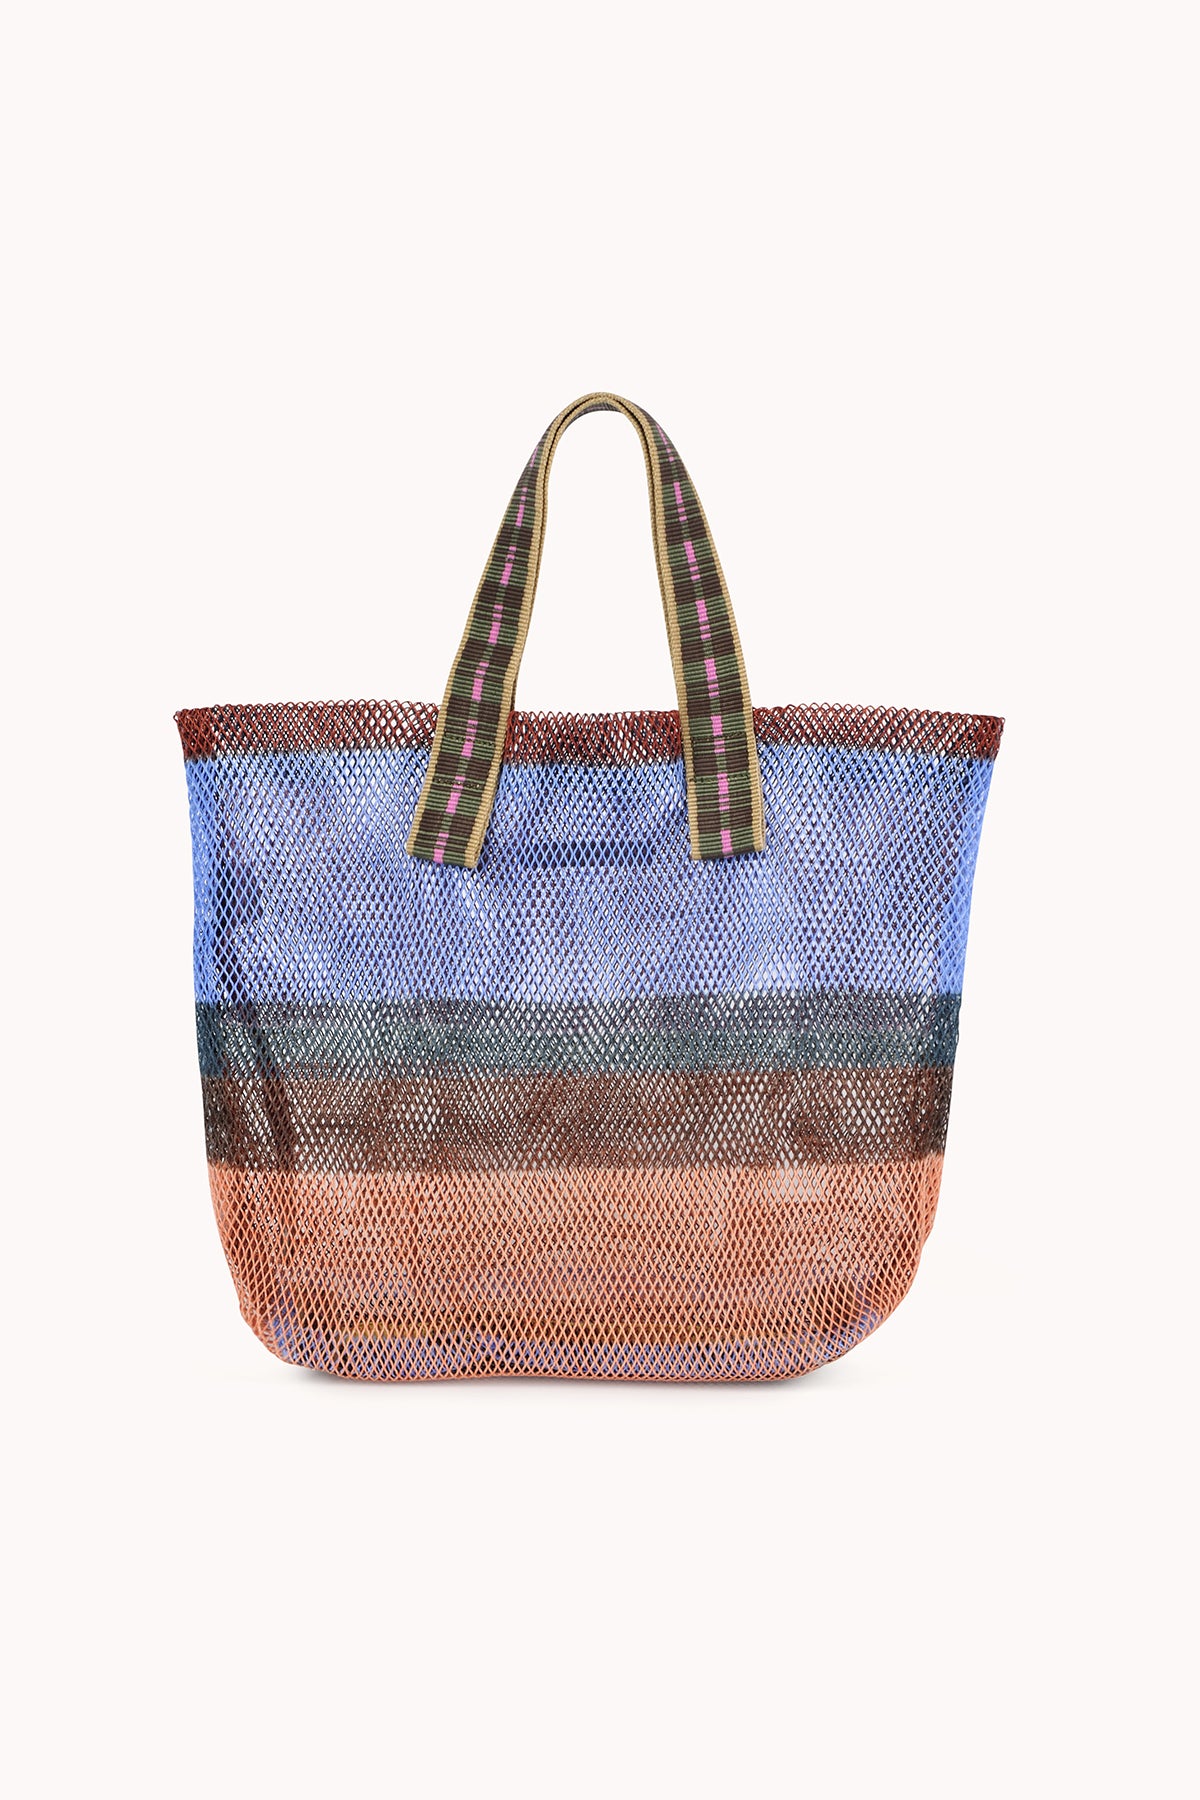   SMALL STRIPED MESH TOTE BY EPICE 